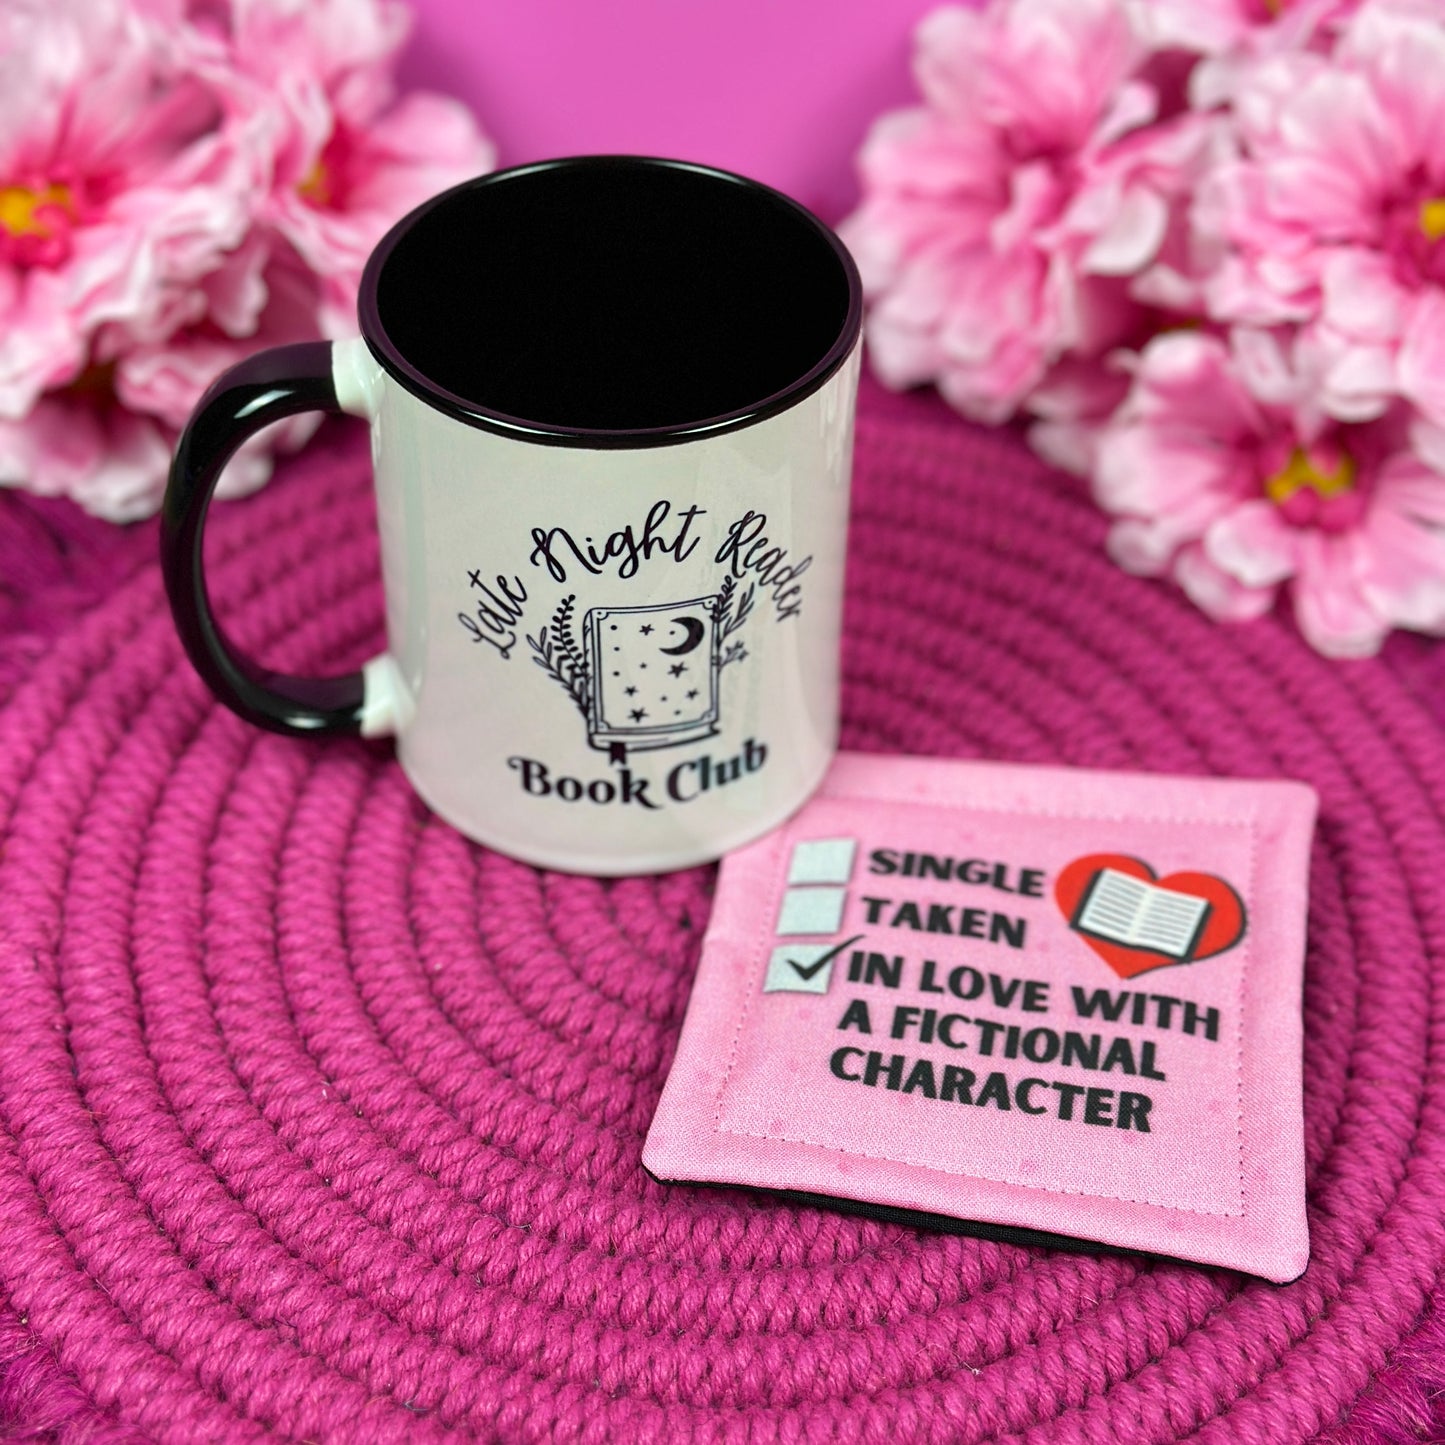 In Love with a Fictional Character Mug Rug